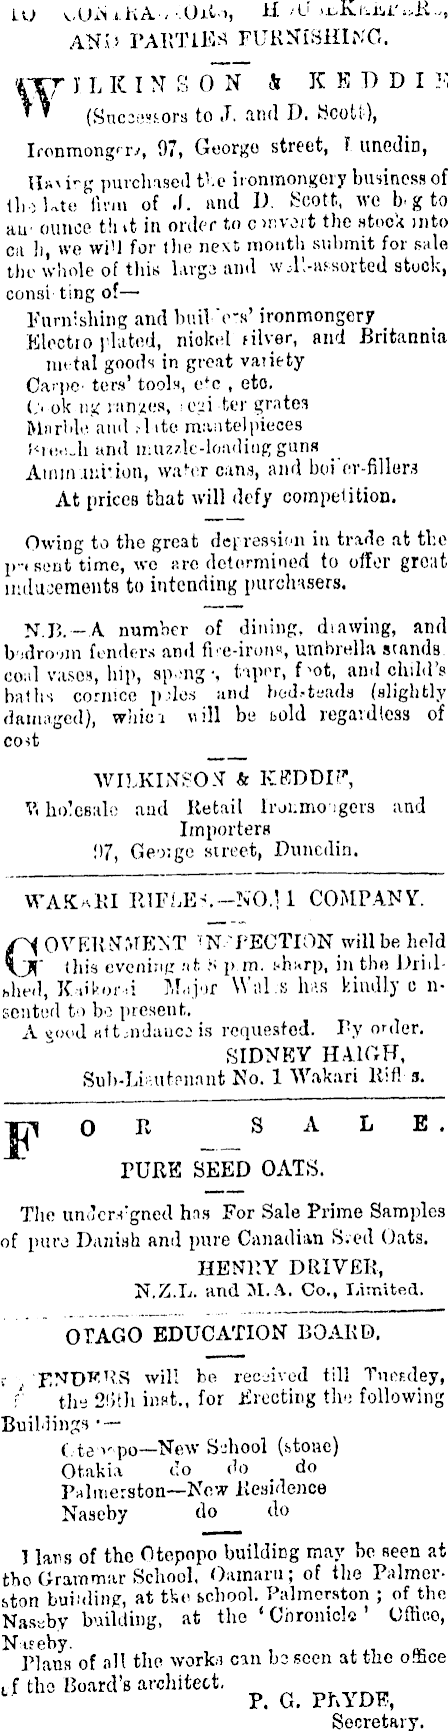 Papers Past Newspapers Evening Star 14 August 1879 Page 3 Advertisements Column 2